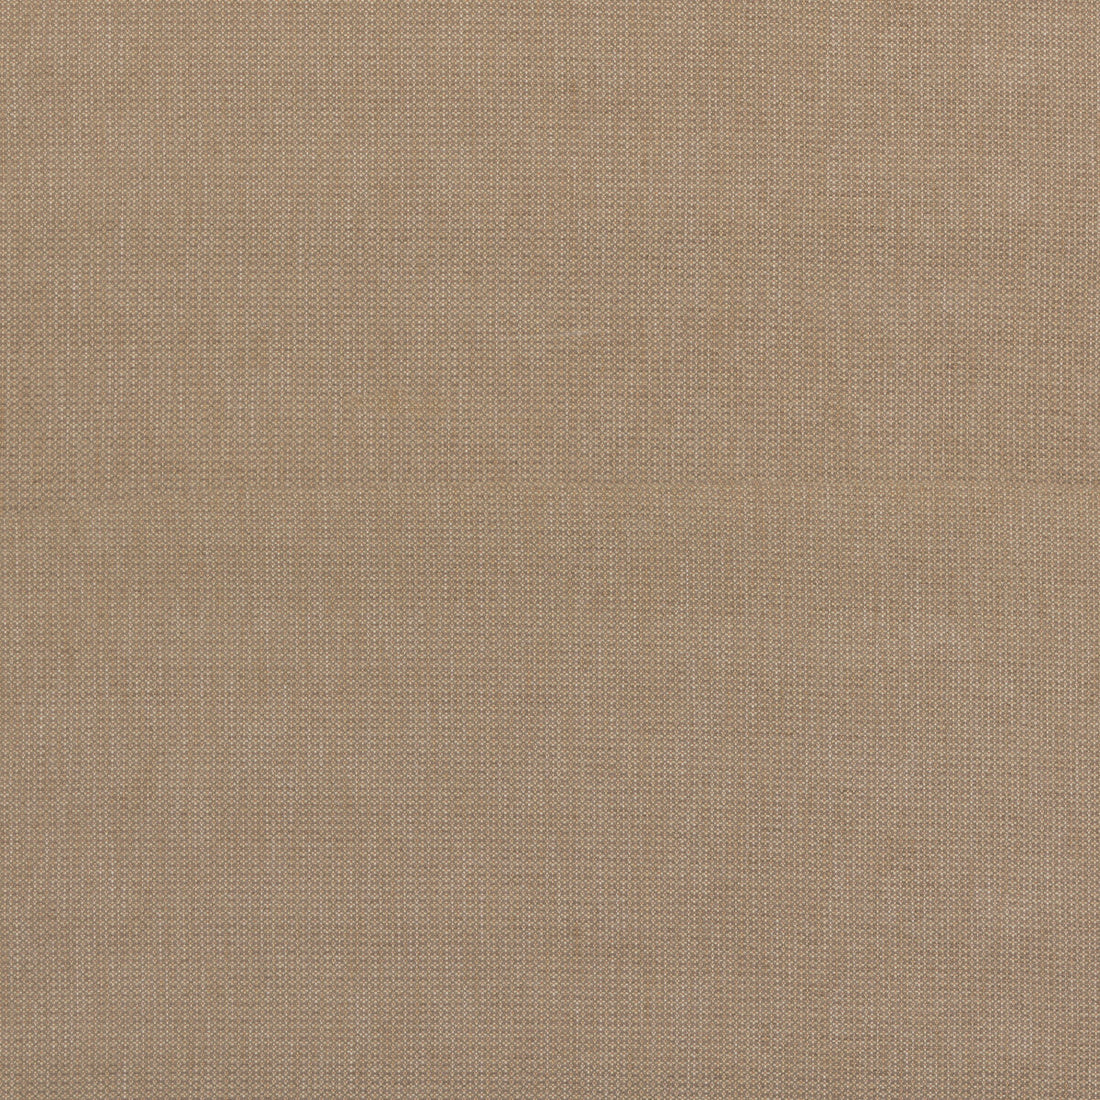 Burford Weave fabric in nutmeg color - pattern BF11035.6.0 - by G P &amp; J Baker in the Burford Weaves collection